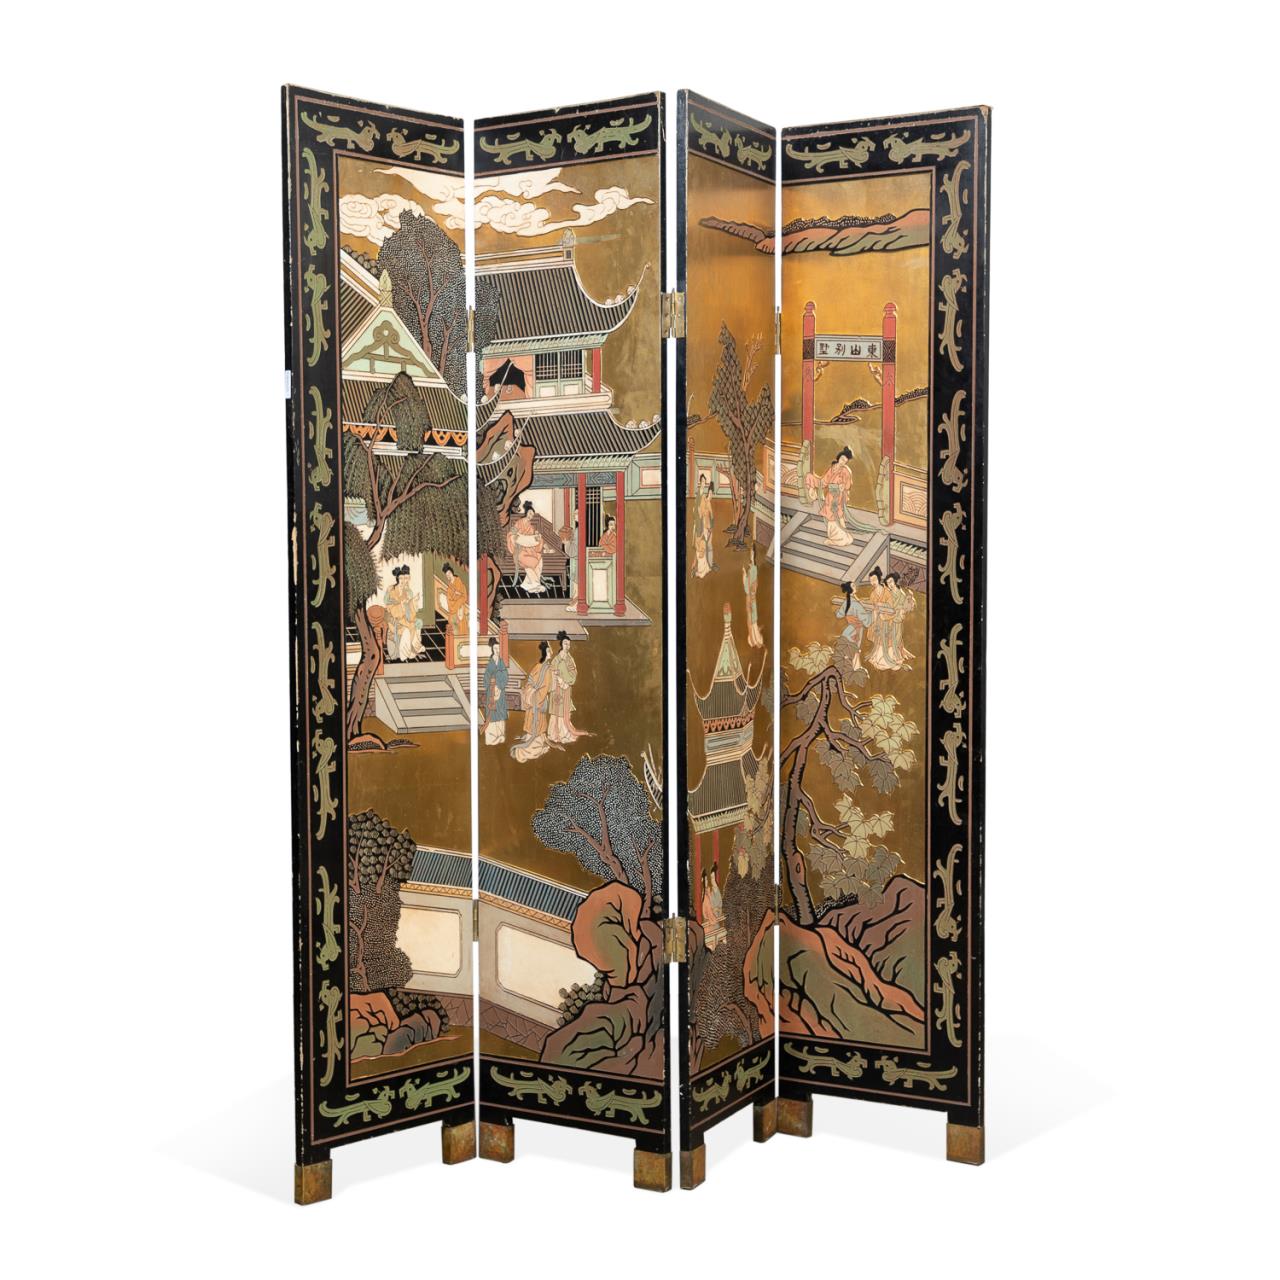 CHINESE FOUR PANEL LACQUER FLOOR 29f7fc